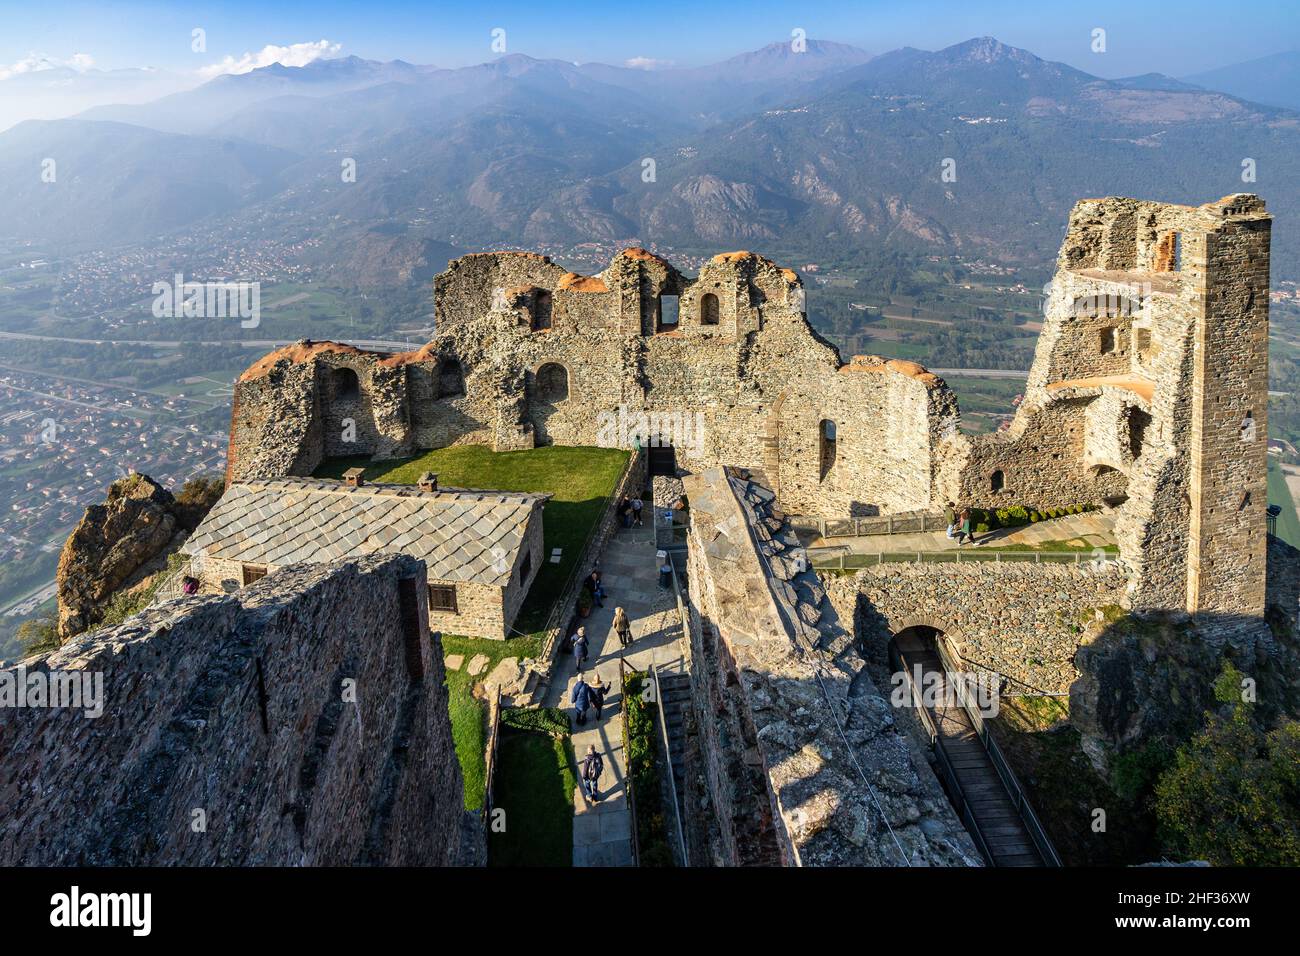 Scenic view of the Sacra di San Michele or Saint Michael's Abbey at Susa Valley, Piedmont, Italy Stock Photo